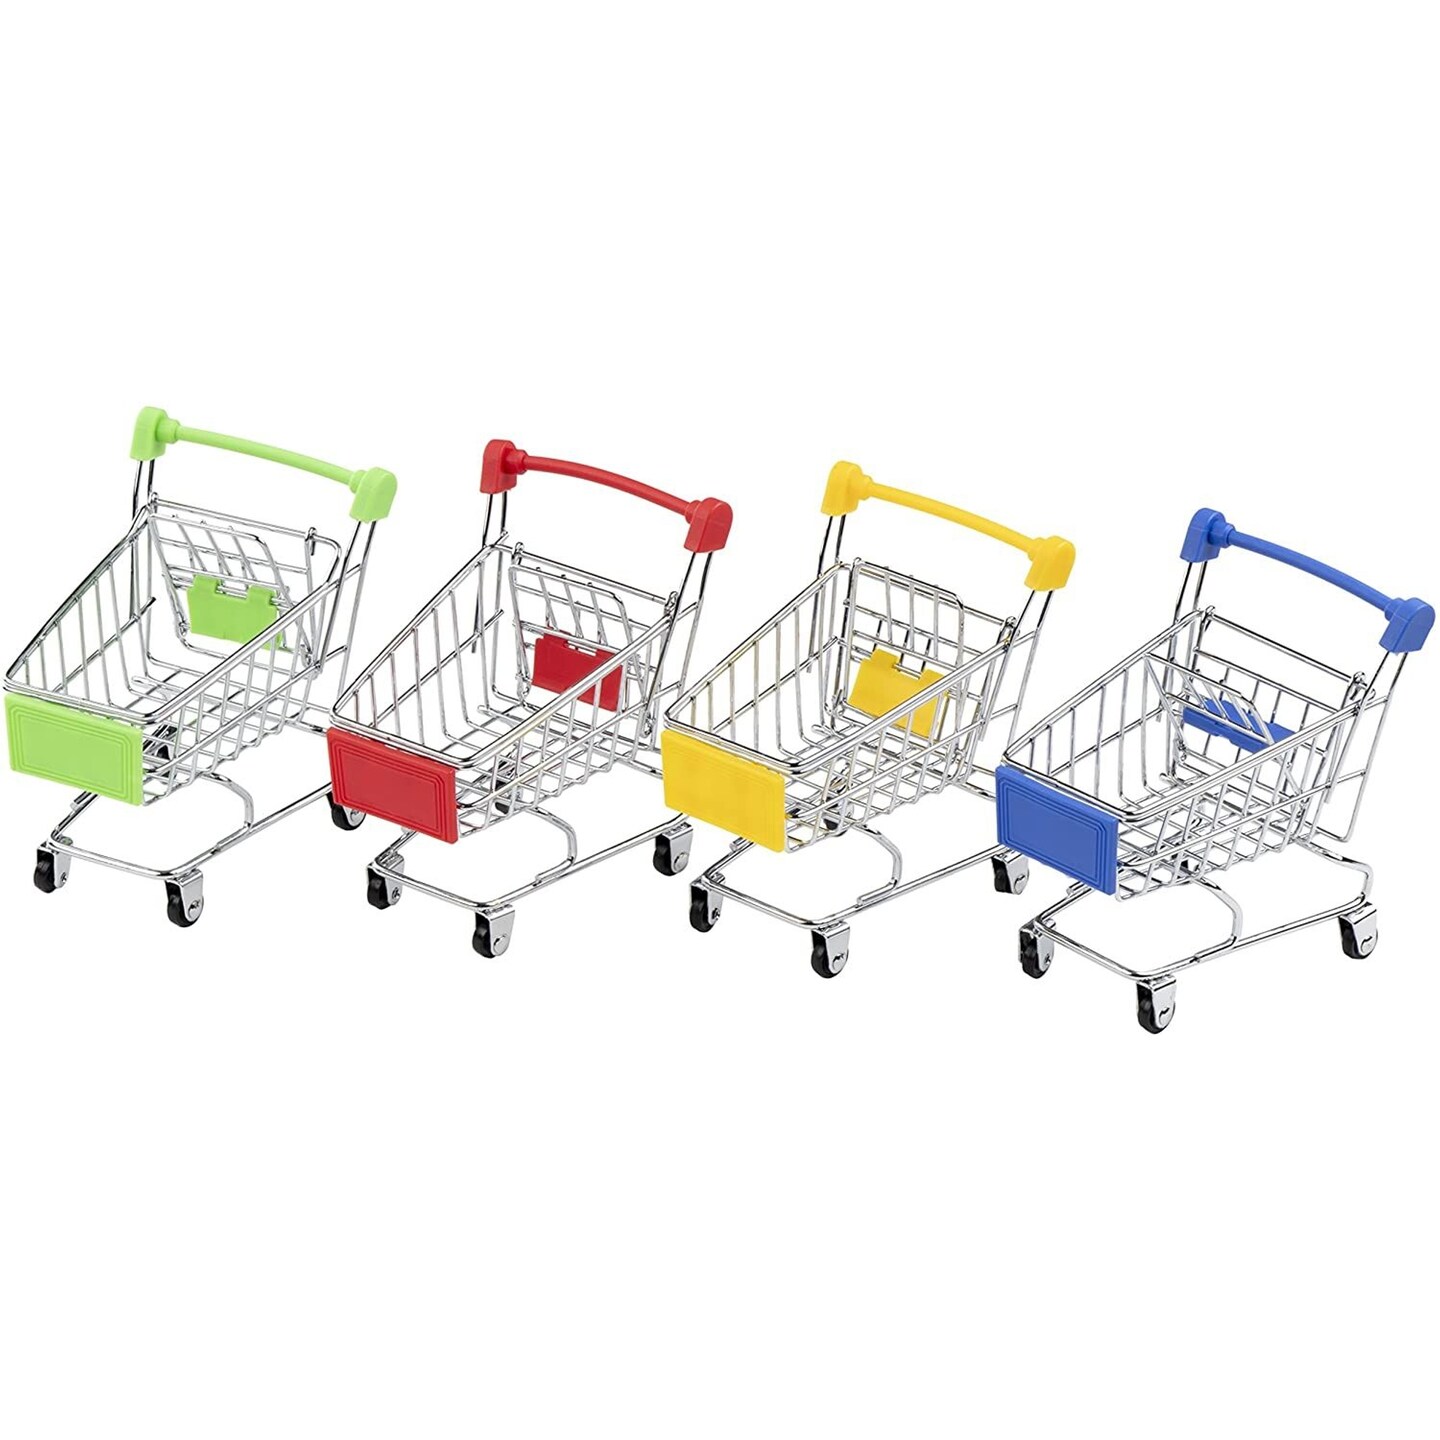 Juvale Mini Supermarket Handcart, 4 Pack Mini Shopping Utility Cart Mode Storage Toy, 4 Colors - Blue, Yellow, Green and Red